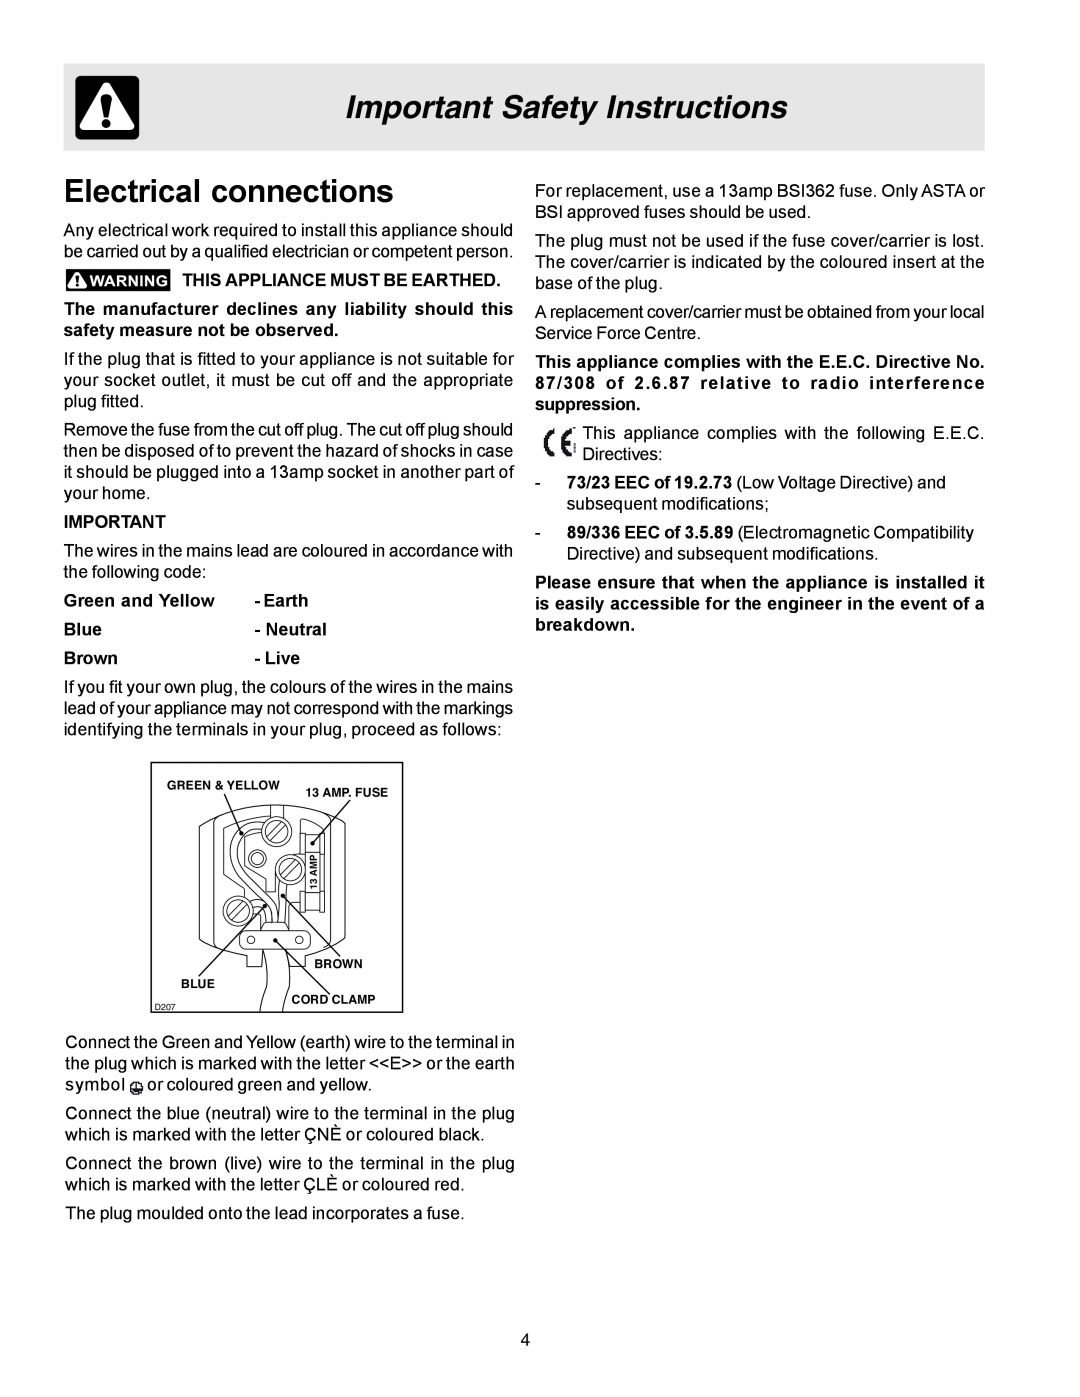 Electrolux U27107 manual Electrical connections, Important Safety Instructions 